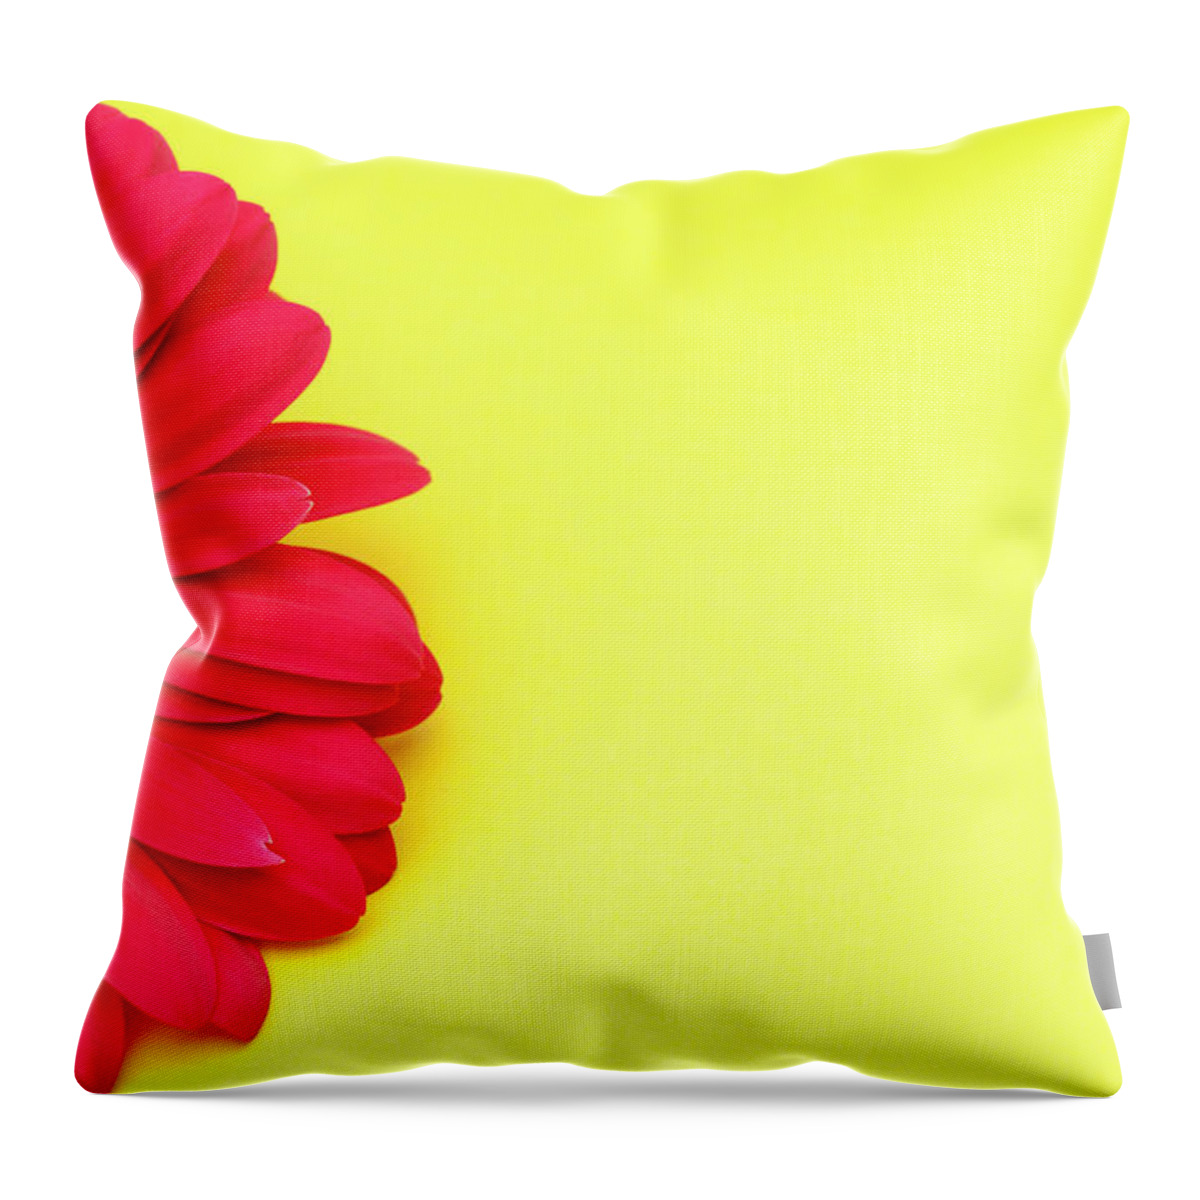 Petal Throw Pillow featuring the photograph Pink Gerbera Daisy On Yellow Background by Jill Fromer